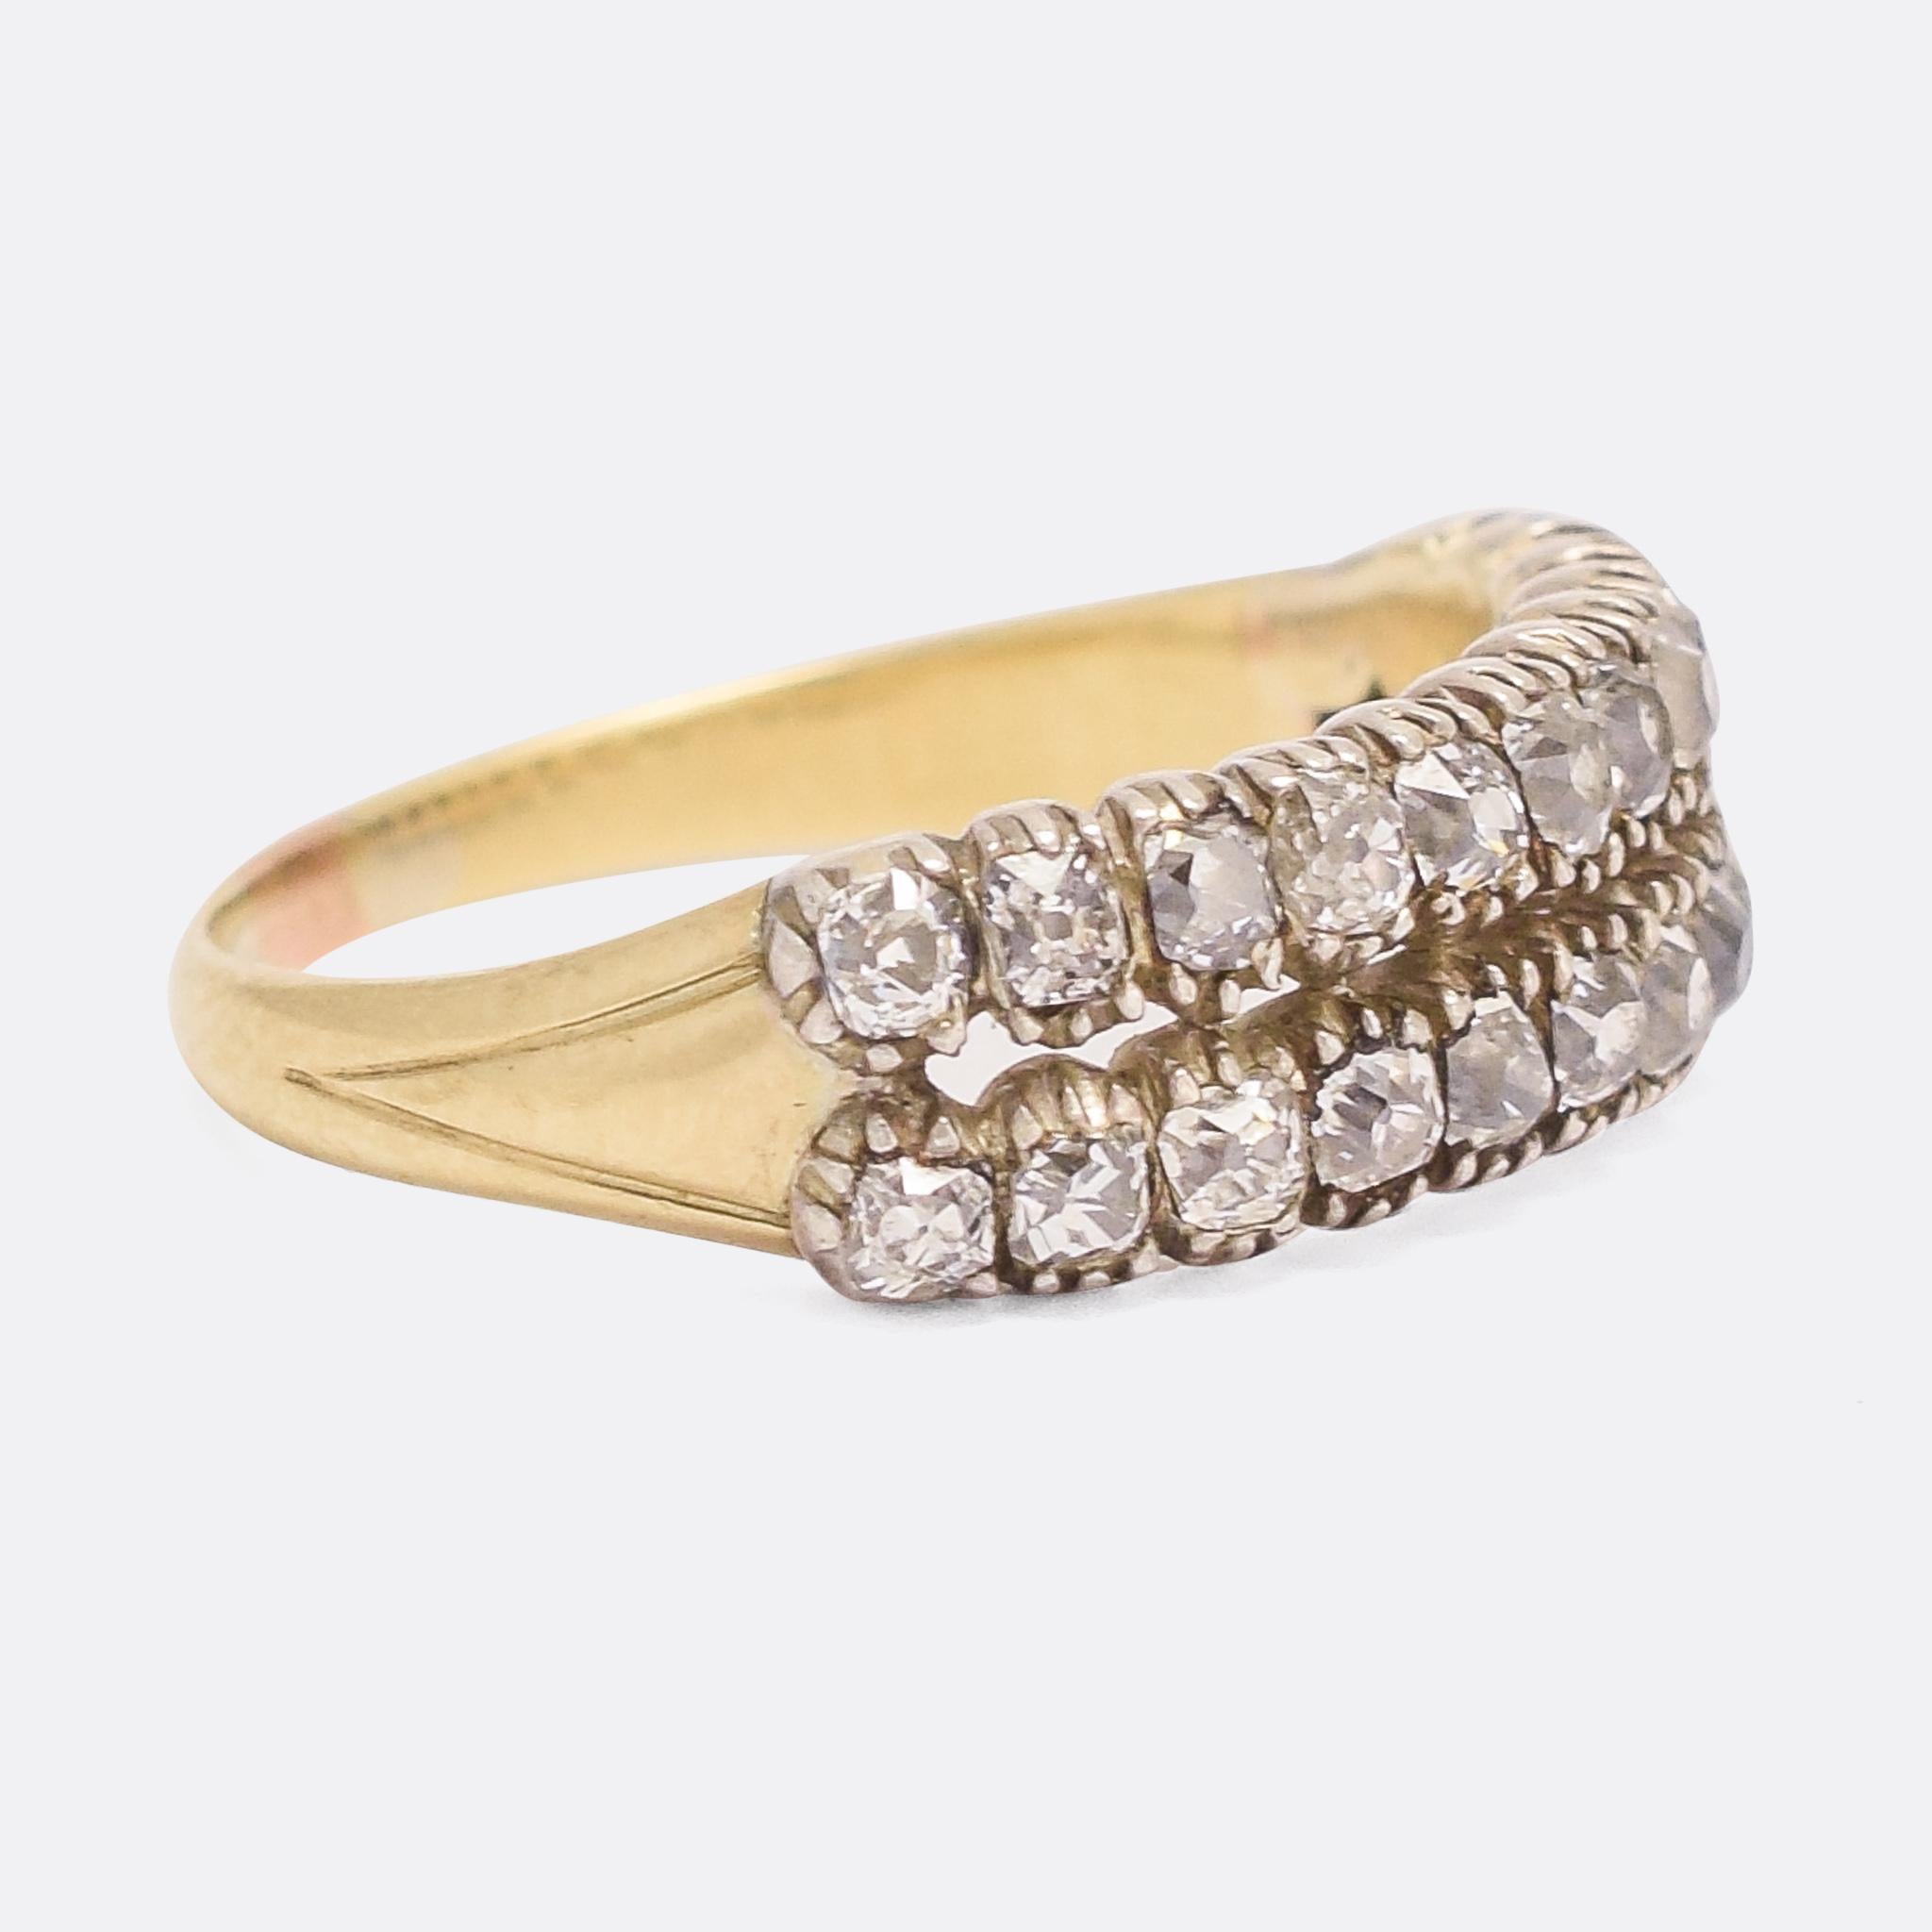 A superb Georgian diamond double row ring dating from the early 19th Century, circa 1820. The old mine cut stones rest in closed back silver pie-crust settings, while the band is modelled in 15 karat yellow gold. Home to over 1.1 carats of diamonds,